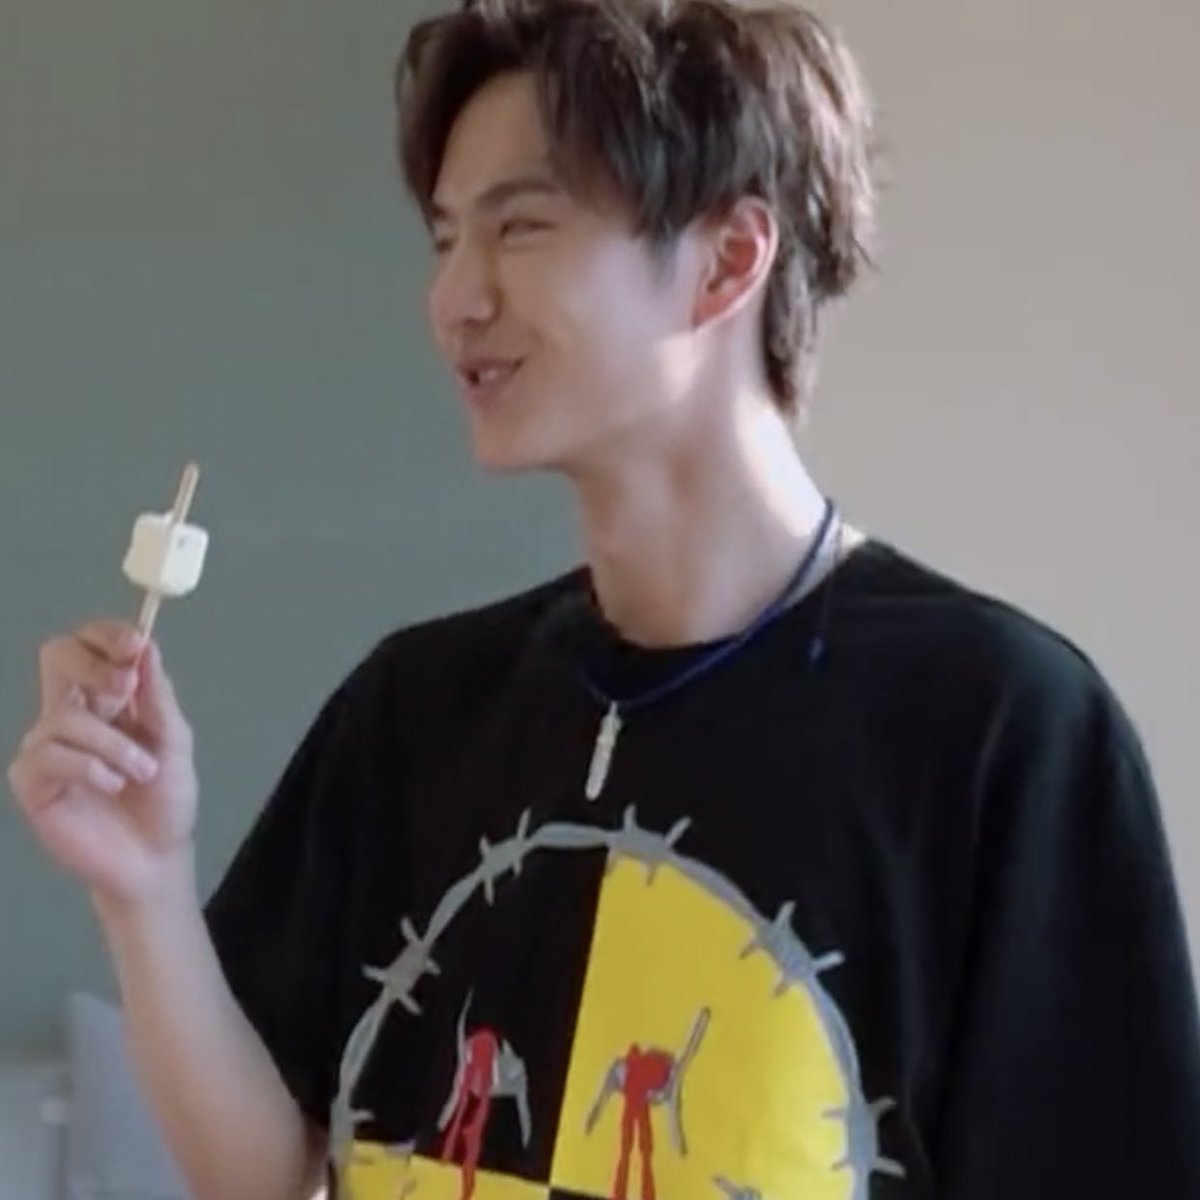 anyway. there’s lots more- a full hour of yibo being brilliant and talented and a babie.app: :  https://m.mgtv.com/b/334728/7635340.html?t=videoshare&tc=jXKKosRPSAN7&dc=54761411-AE49-47BD-97D9-617BB01A4512youtube: